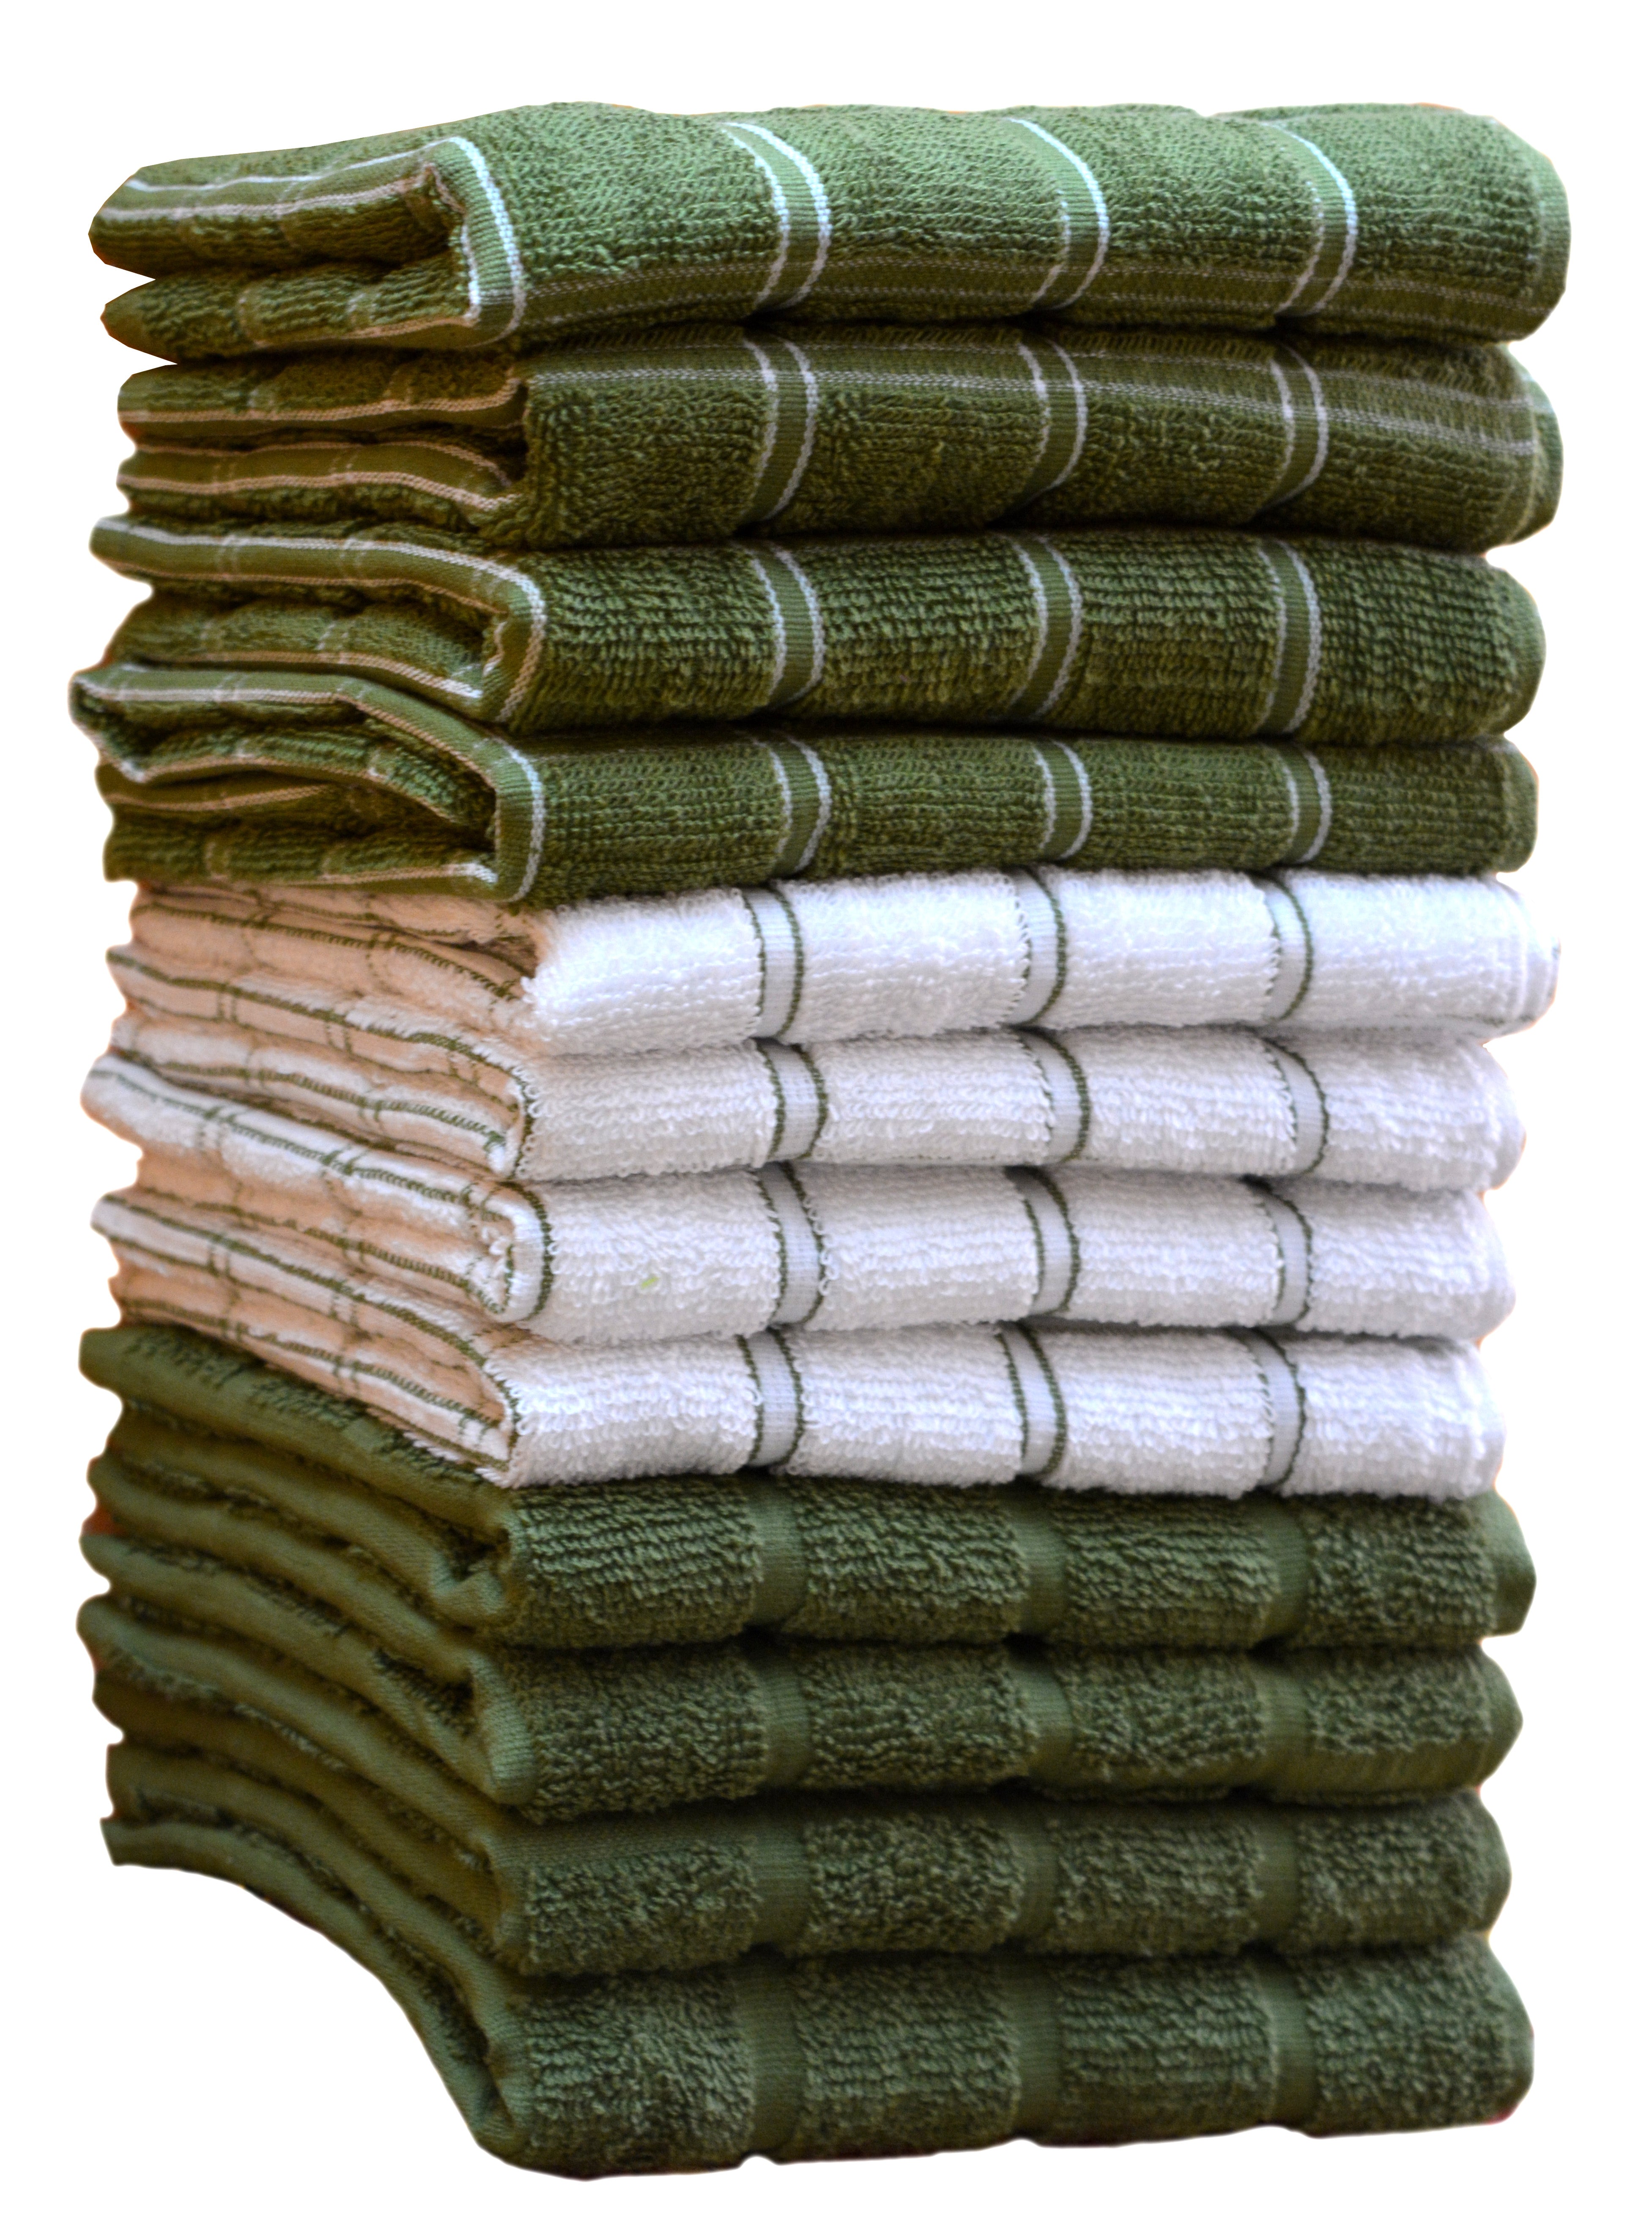 Home Labels Classic Kitchen Towel 12 Pack, 15 x 25 Inches, 100% Ring Spun Cotton Super Soft and Absorbent Linen Dish Towels, Tea Bar Set (Green)